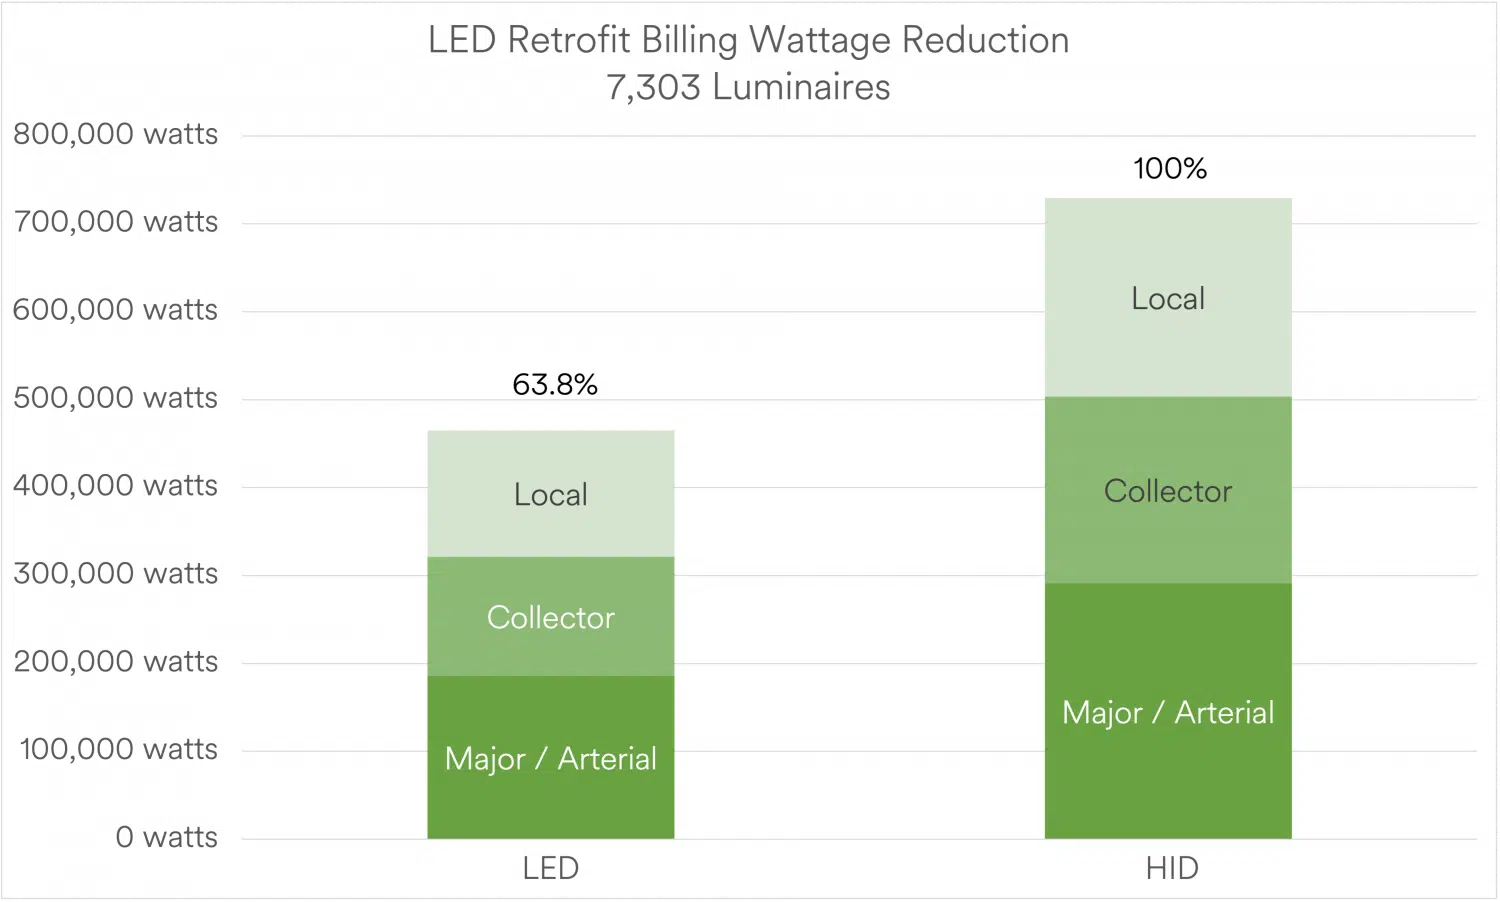 A bar chart comparing the billing wattage of HID lighting with an LED retrofit project for a city with 7,300 luminaires.